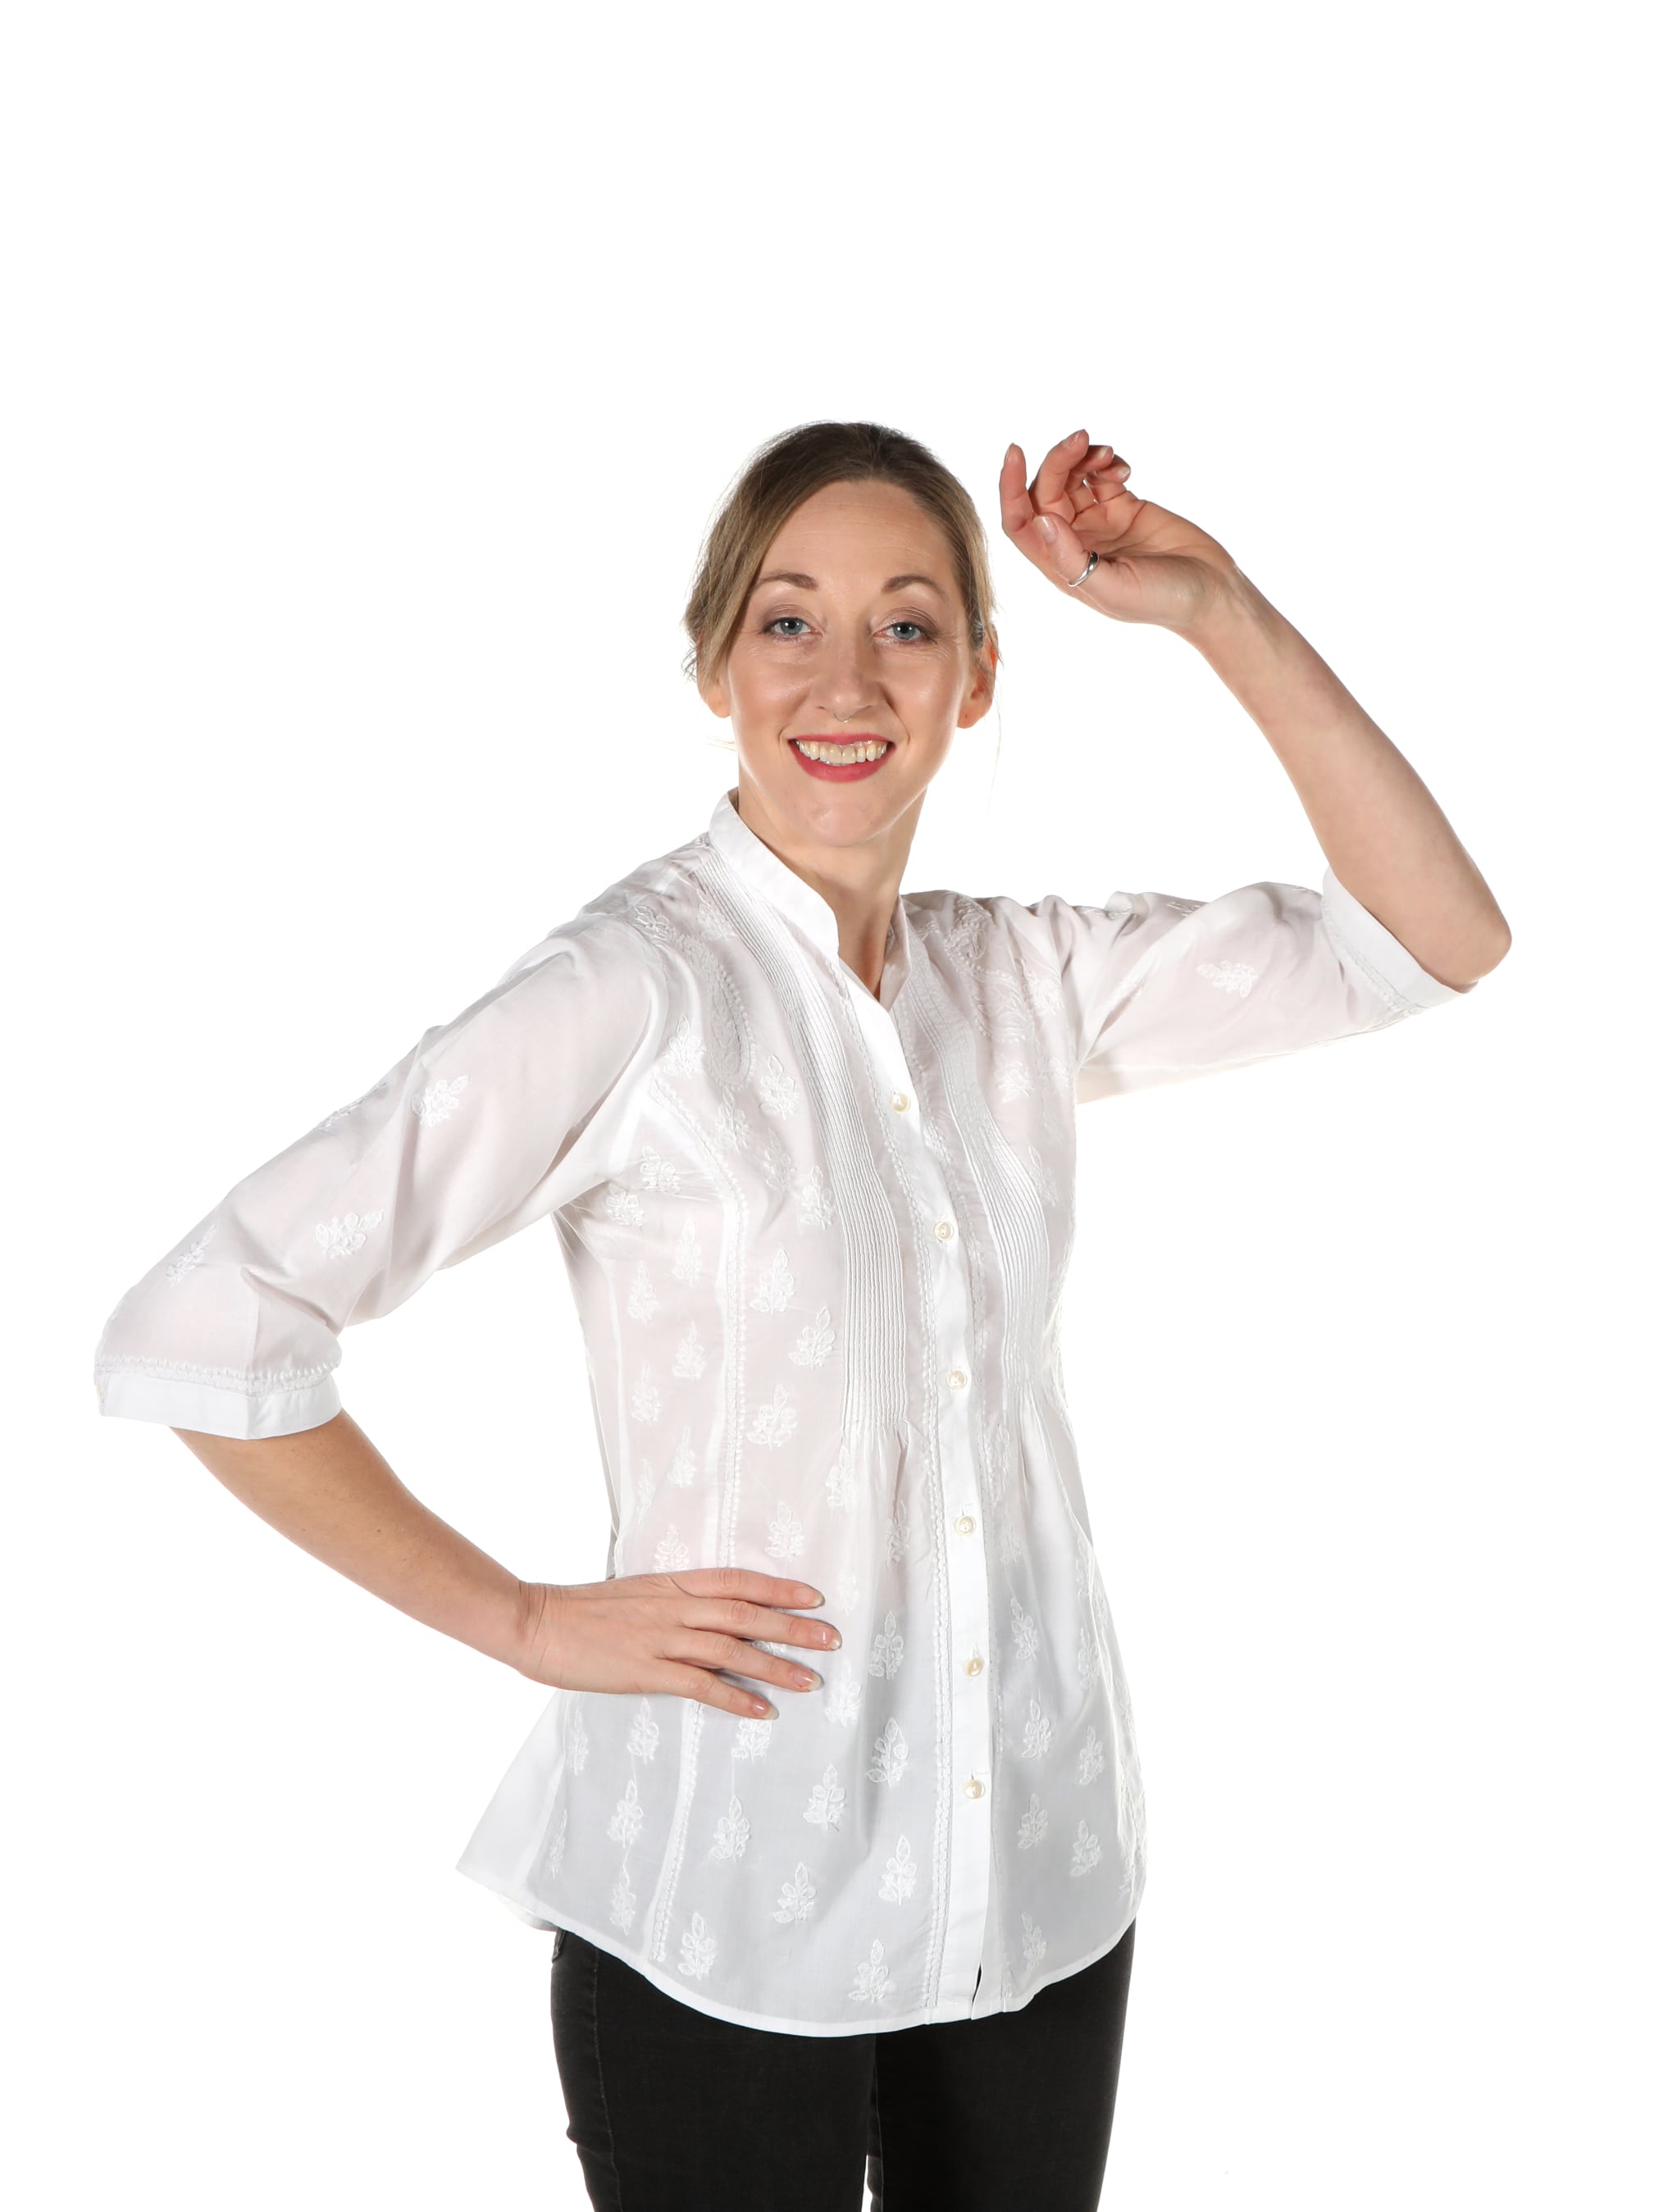 The perfect White Shirt | Tania Llewellyn Designs